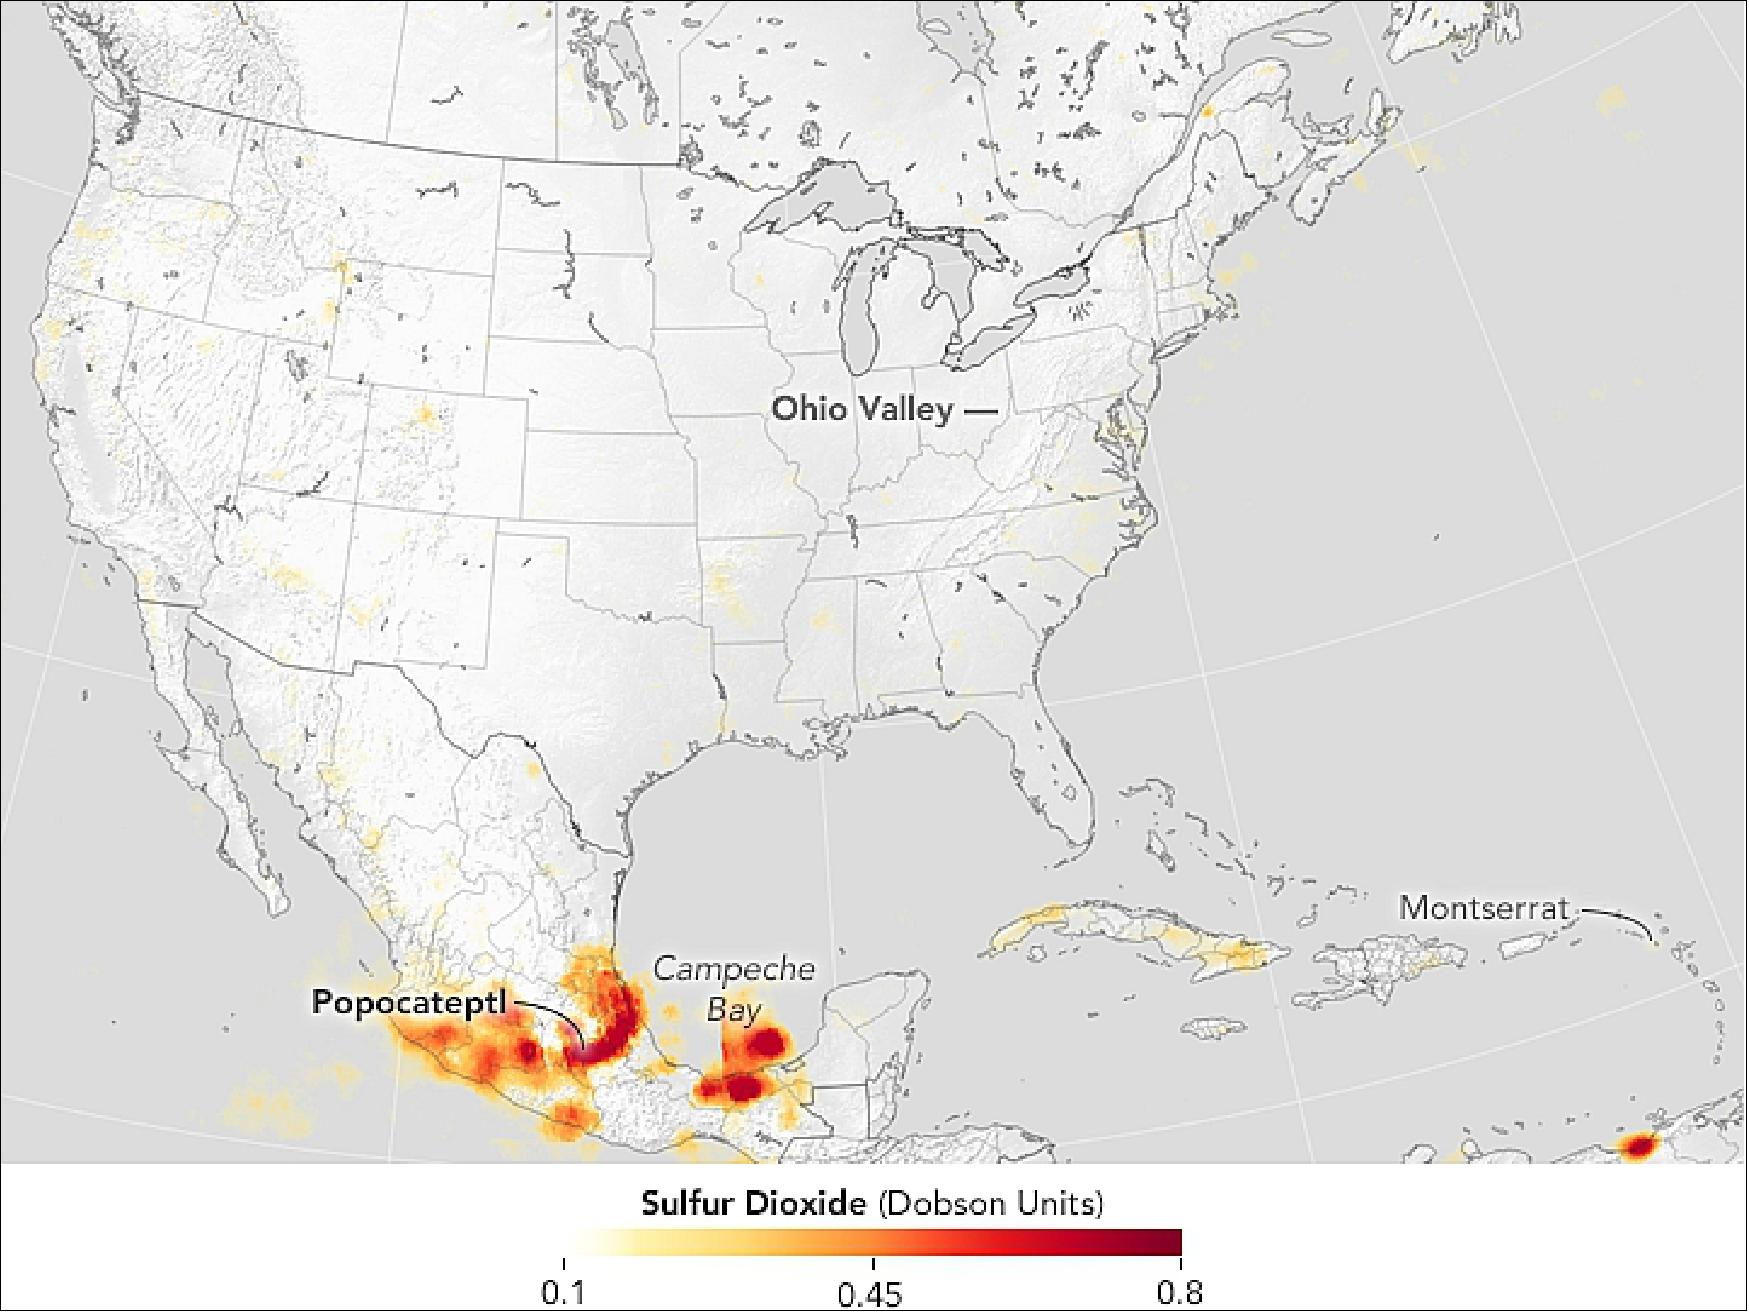 Figure 38: Sulfur Dioxide emissions in North America observed by OMI on NASA's Aura satellite in 2016 (image credit: NASA Earth Observatory, image by Jesse Allen, story by Adam Voiland)